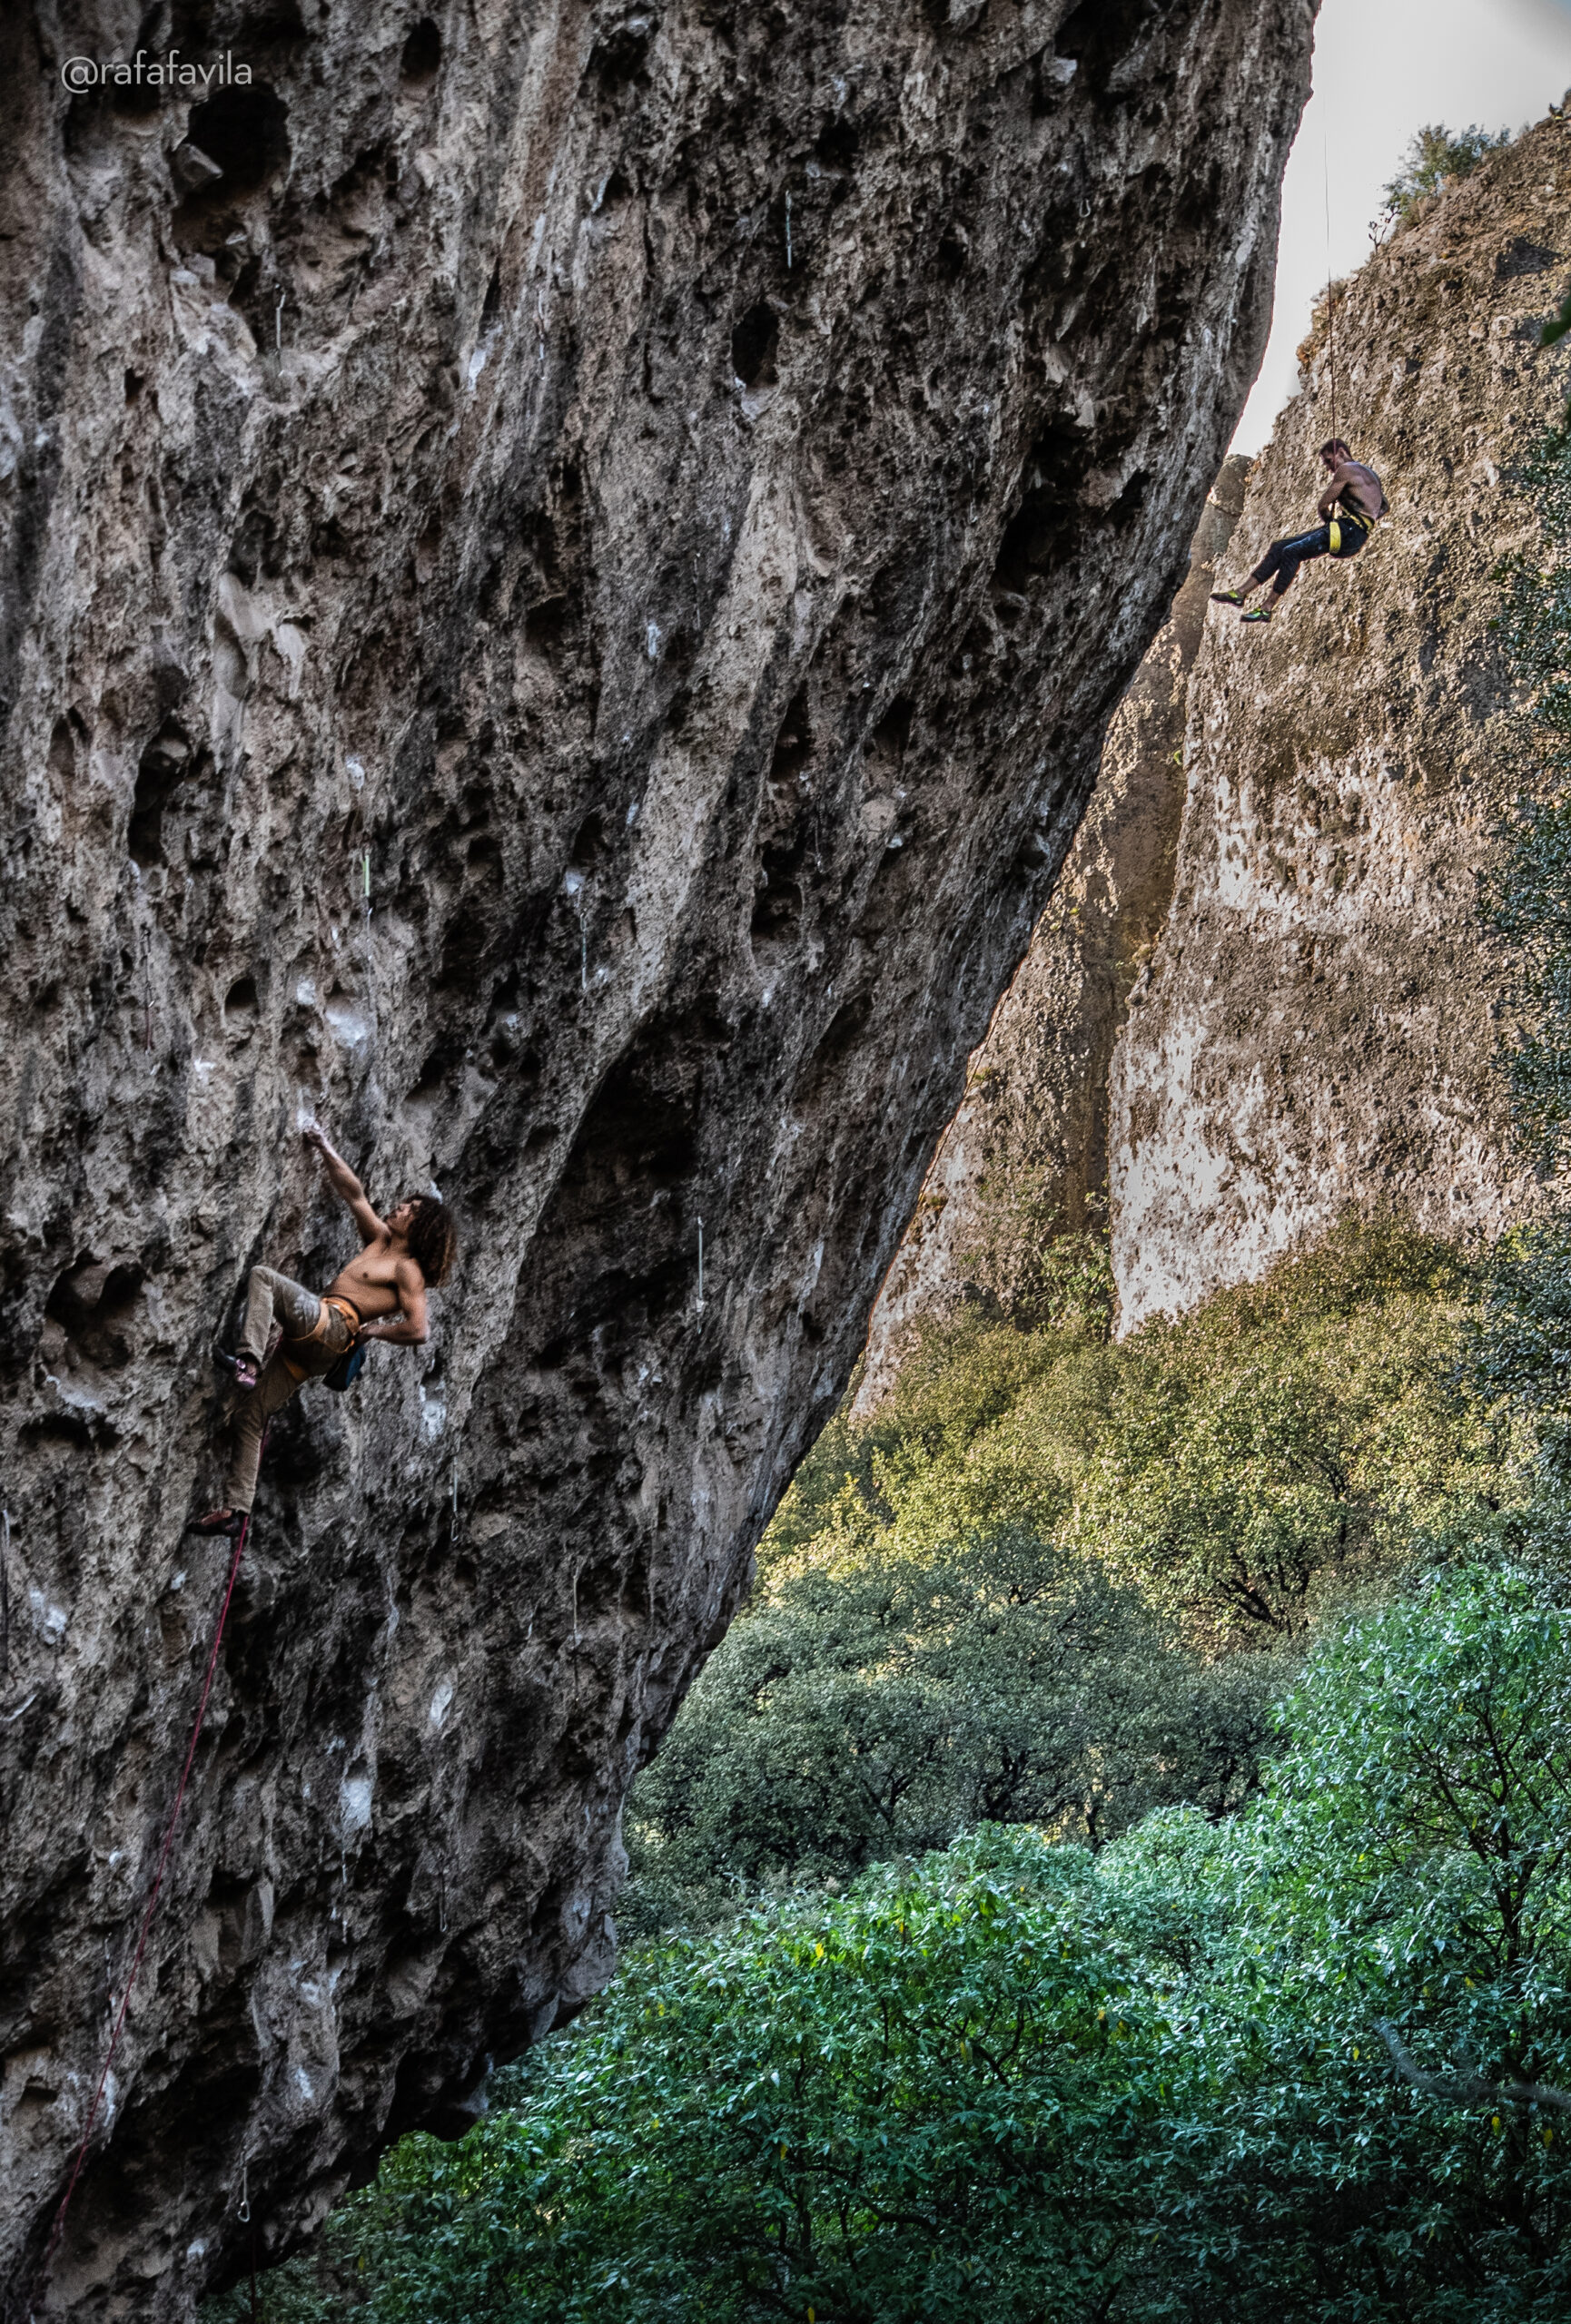 Two rock climbers in a cliff, trying to send some hard routes, the rock is an overhanging wall.